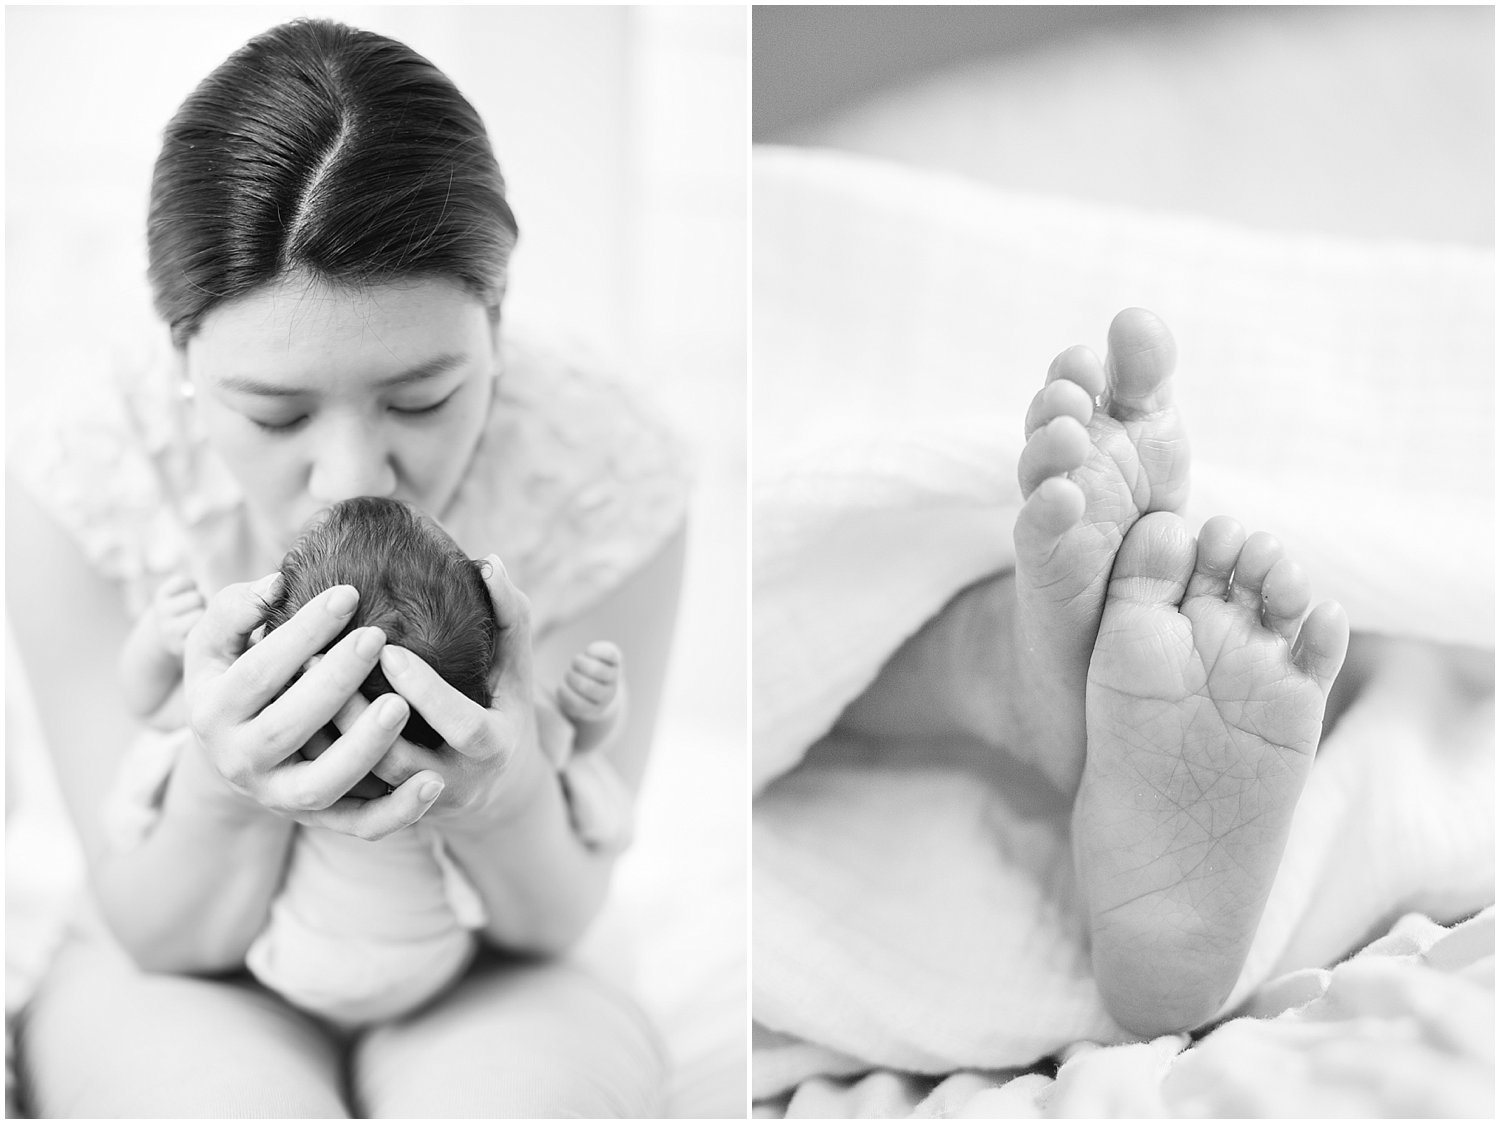 blueberryphotography.com | Lifestyle and Family Photographer in San Francisco | Blueberry Photography